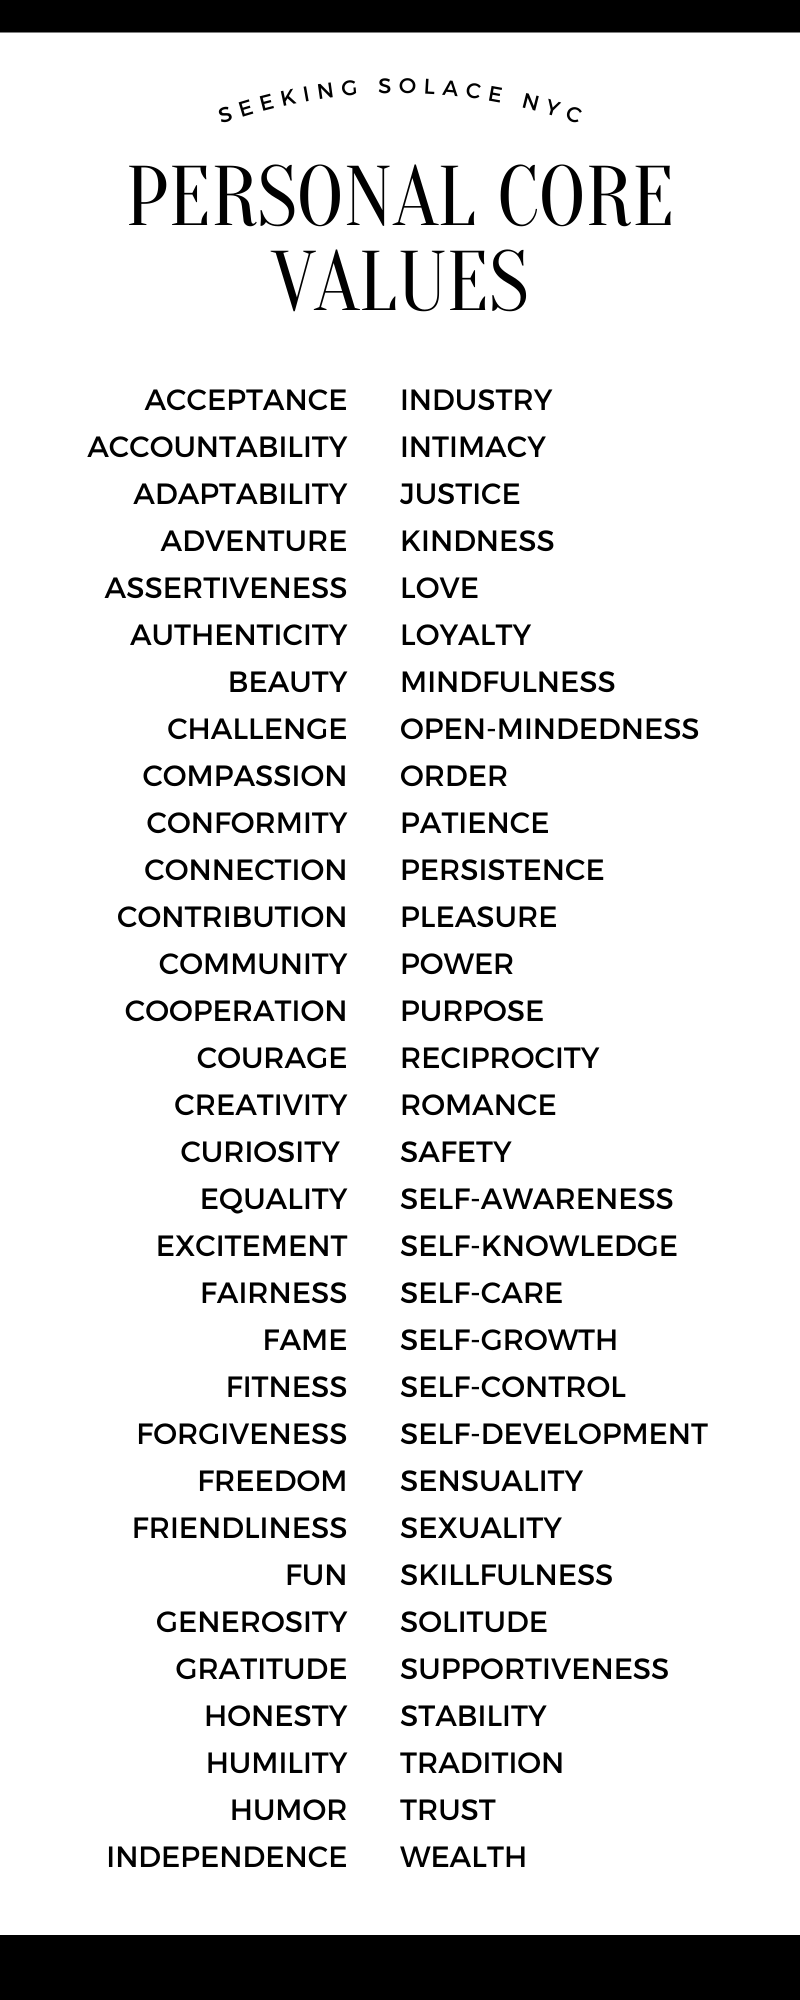 List of personal core values